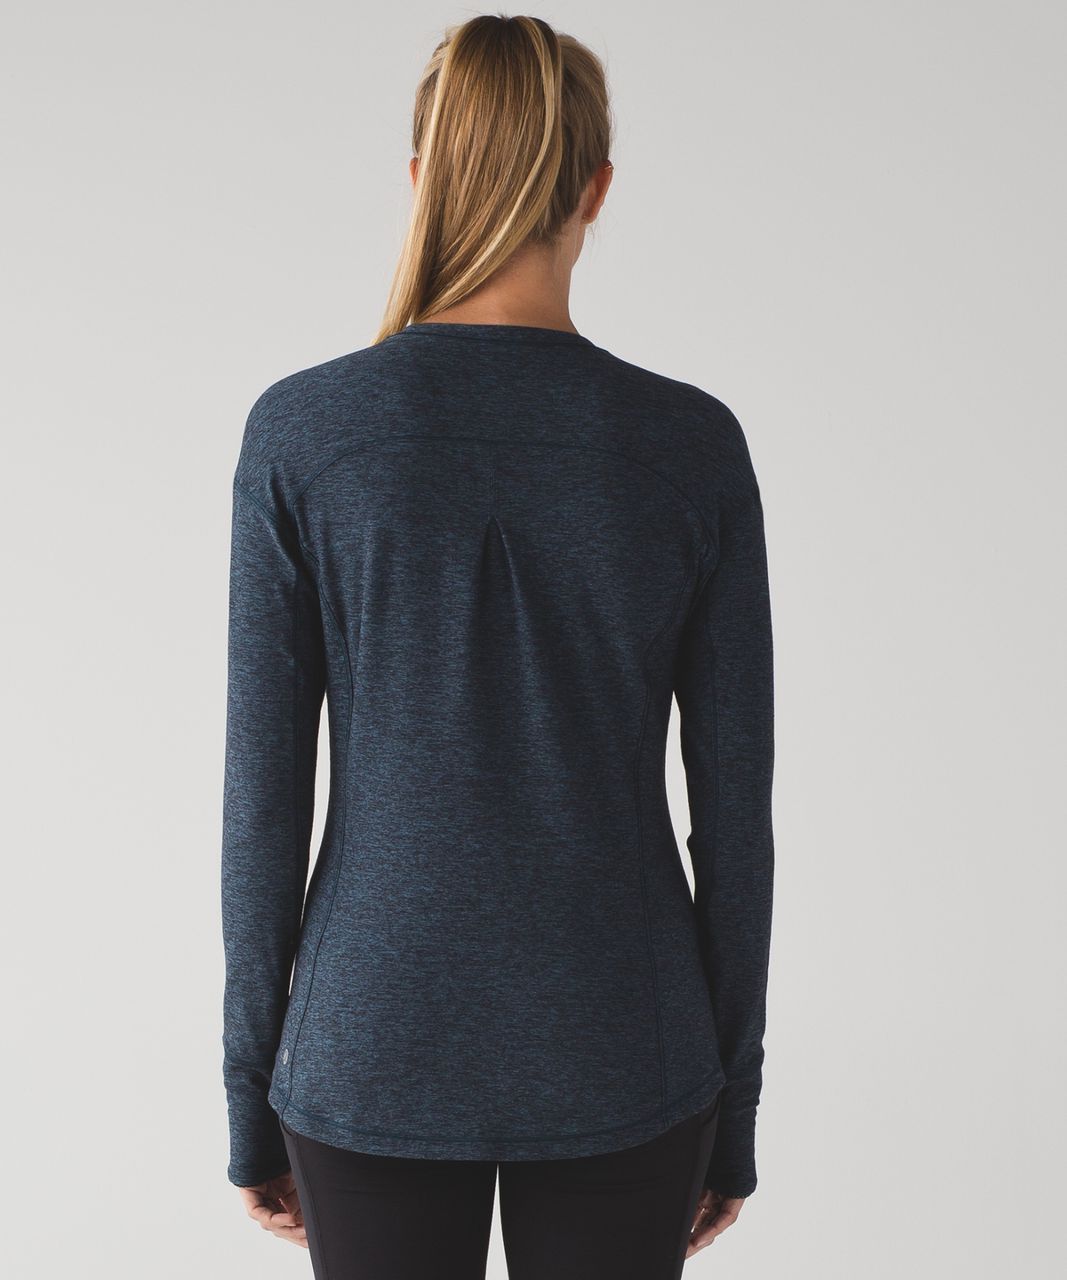 Lululemon Outrun Long Sleeve - Running Luon Suited Jacquard Arctic